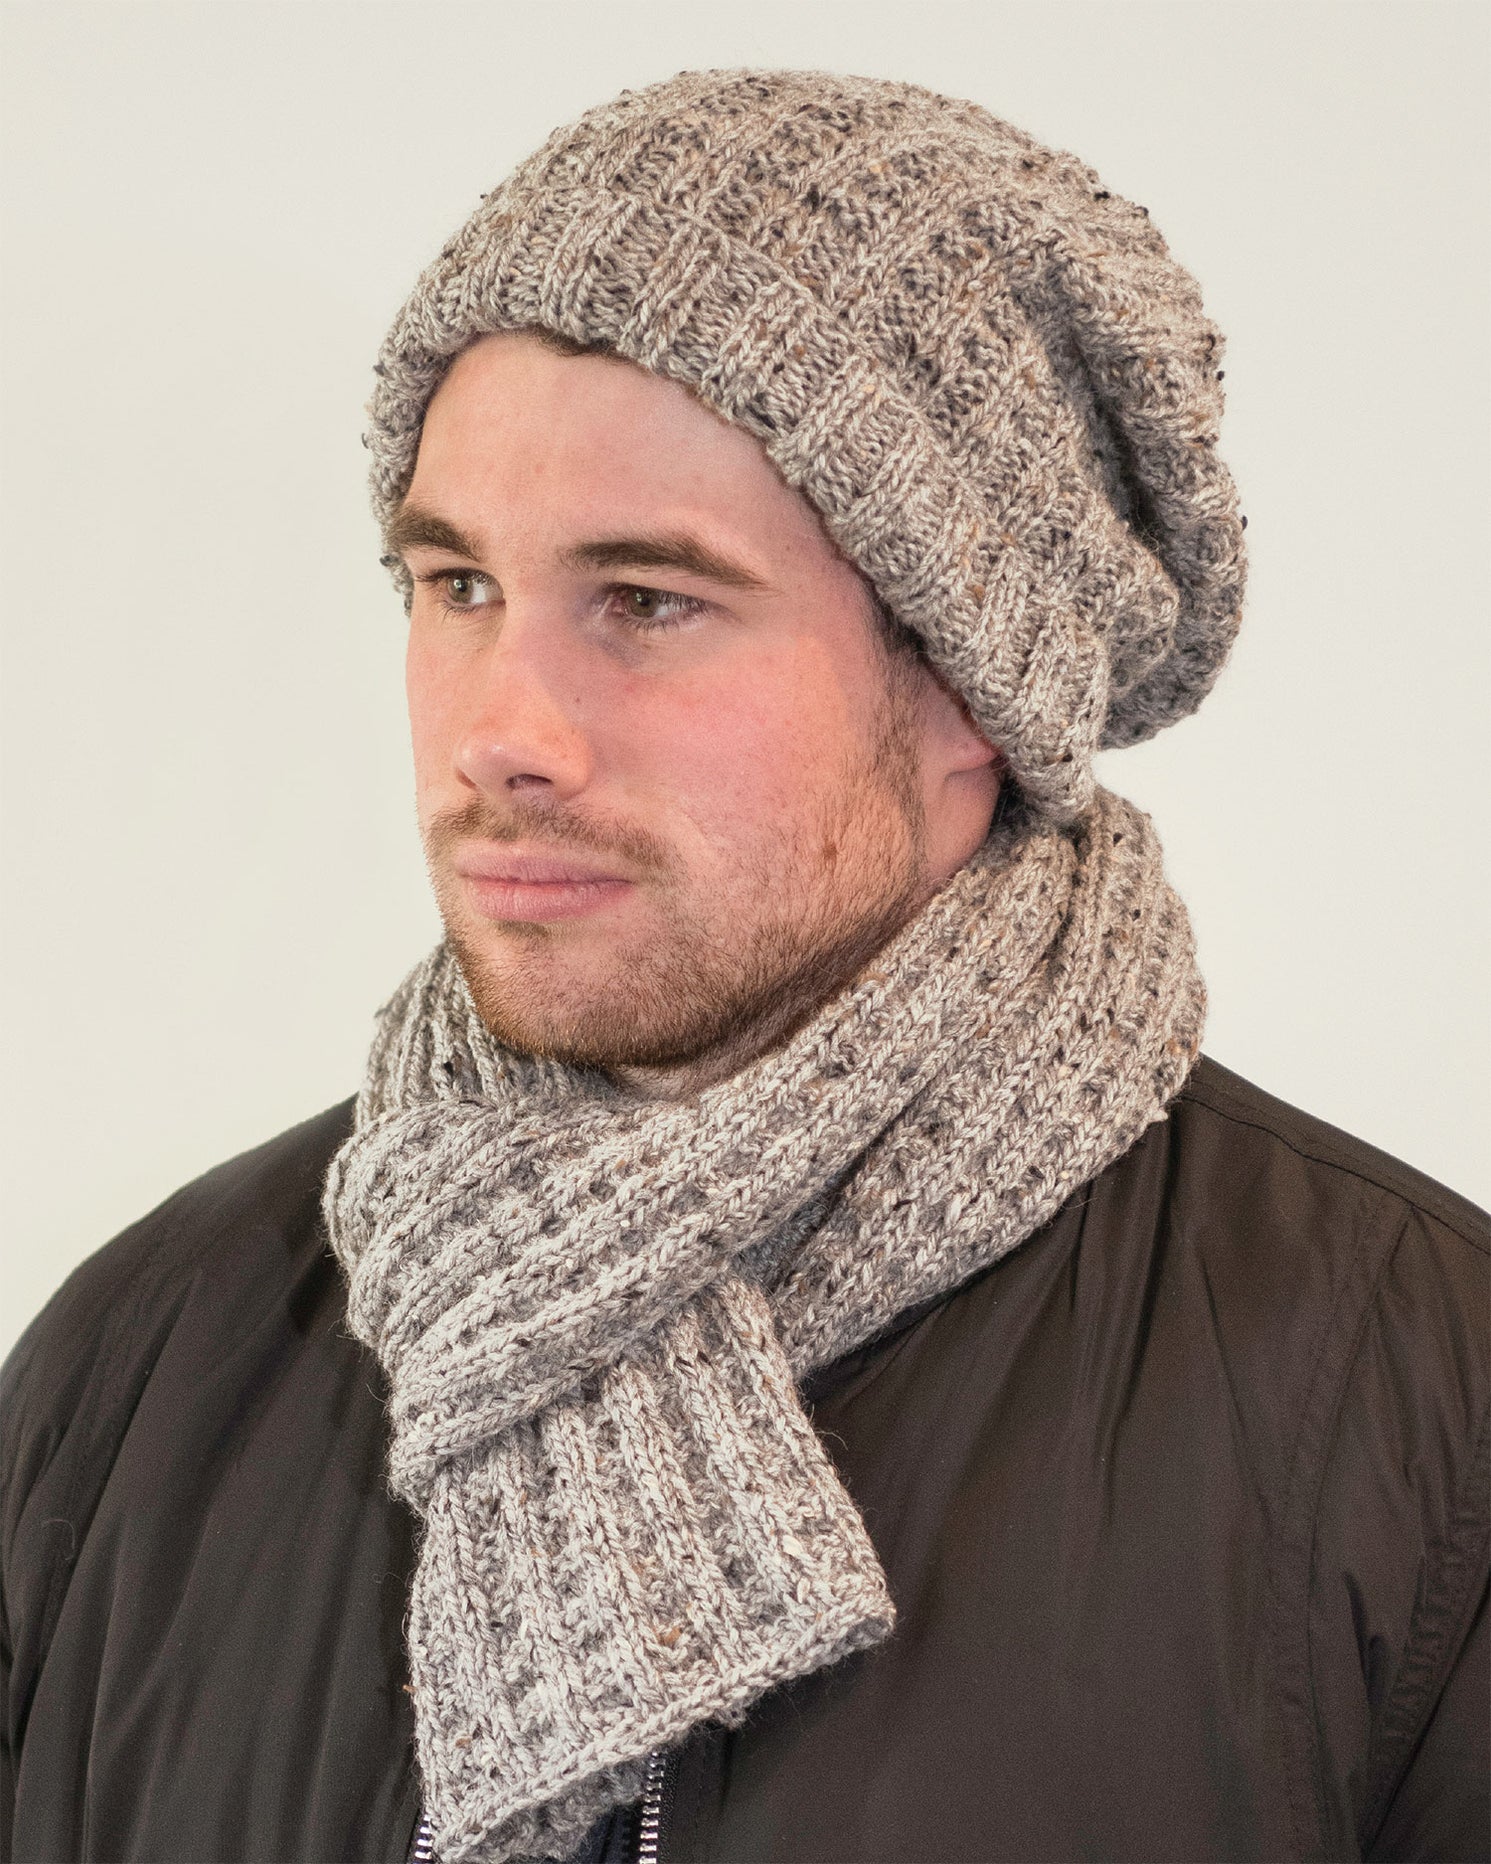 FREE Knitting Pattern Download - Men's Beanie and Scarf 2116